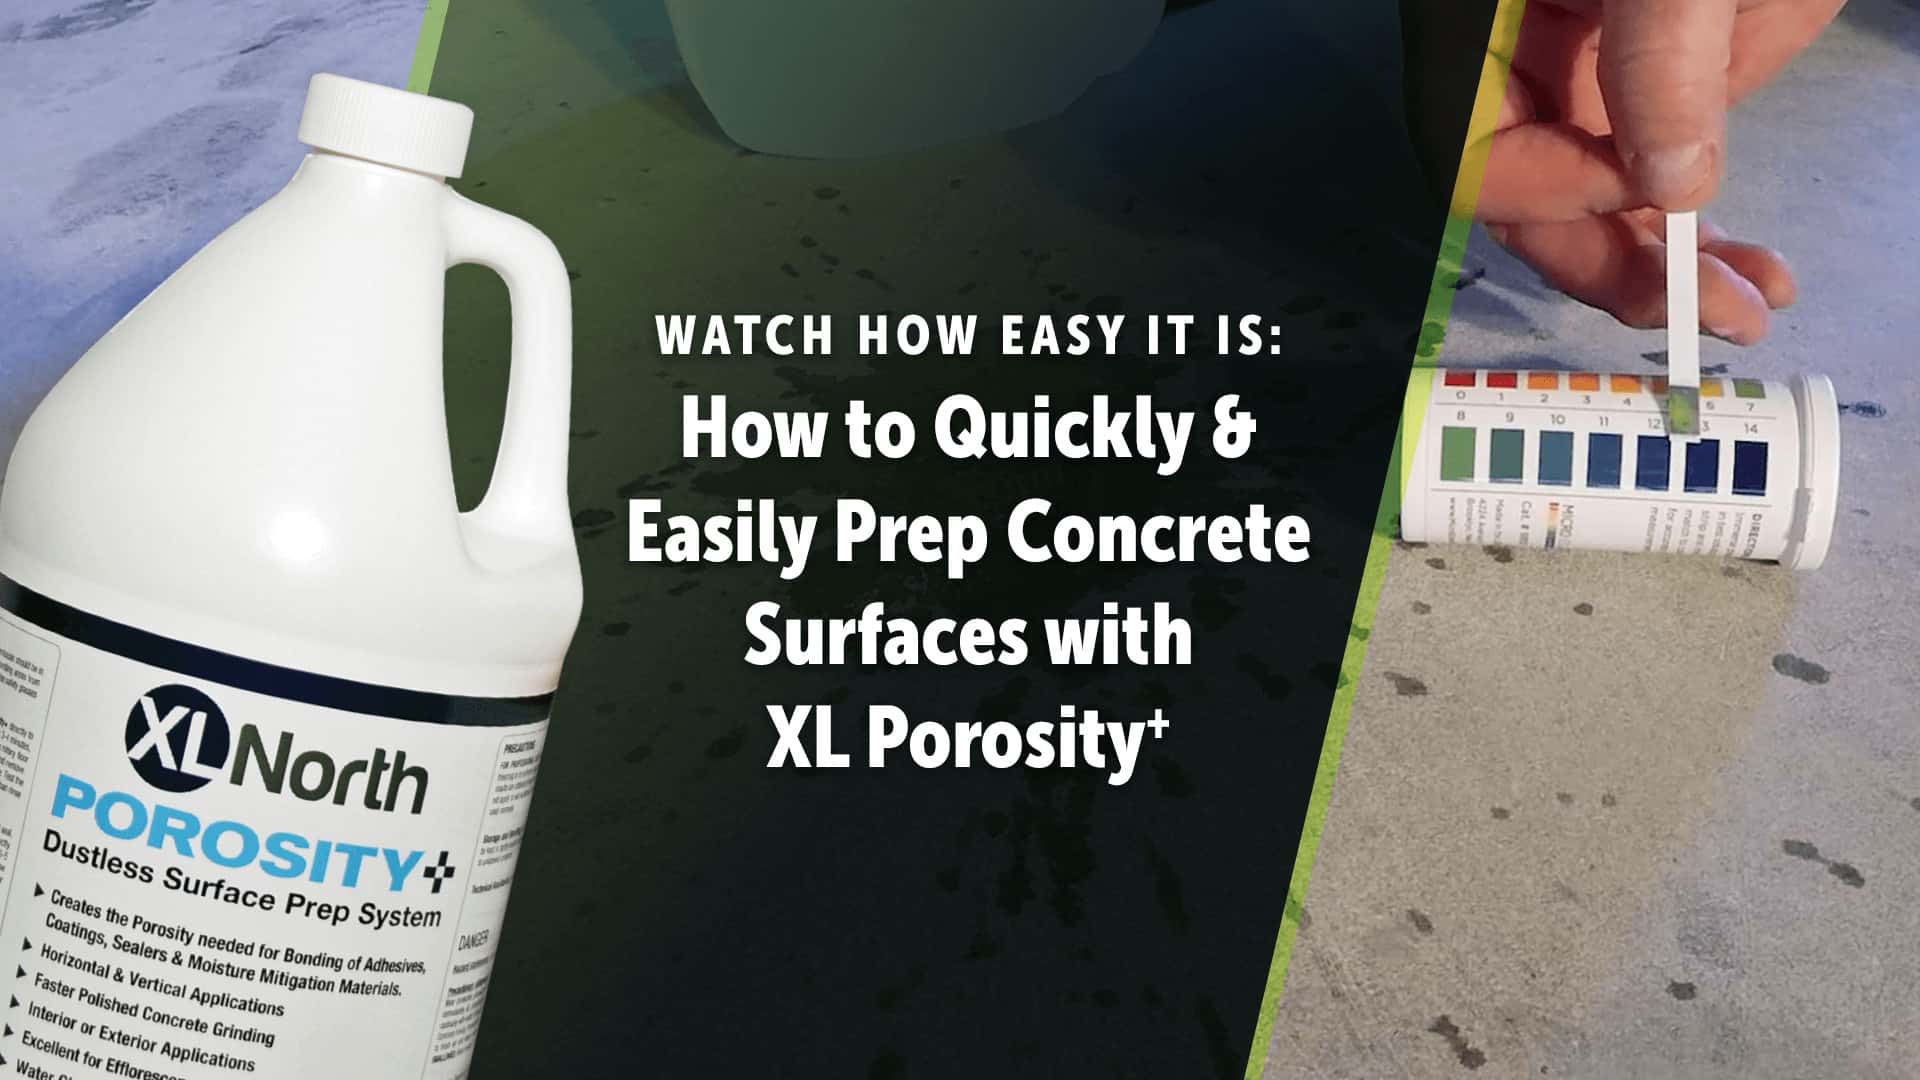 How to Quickly & Easily Prep Concrete Surfaces with XL Porosity+